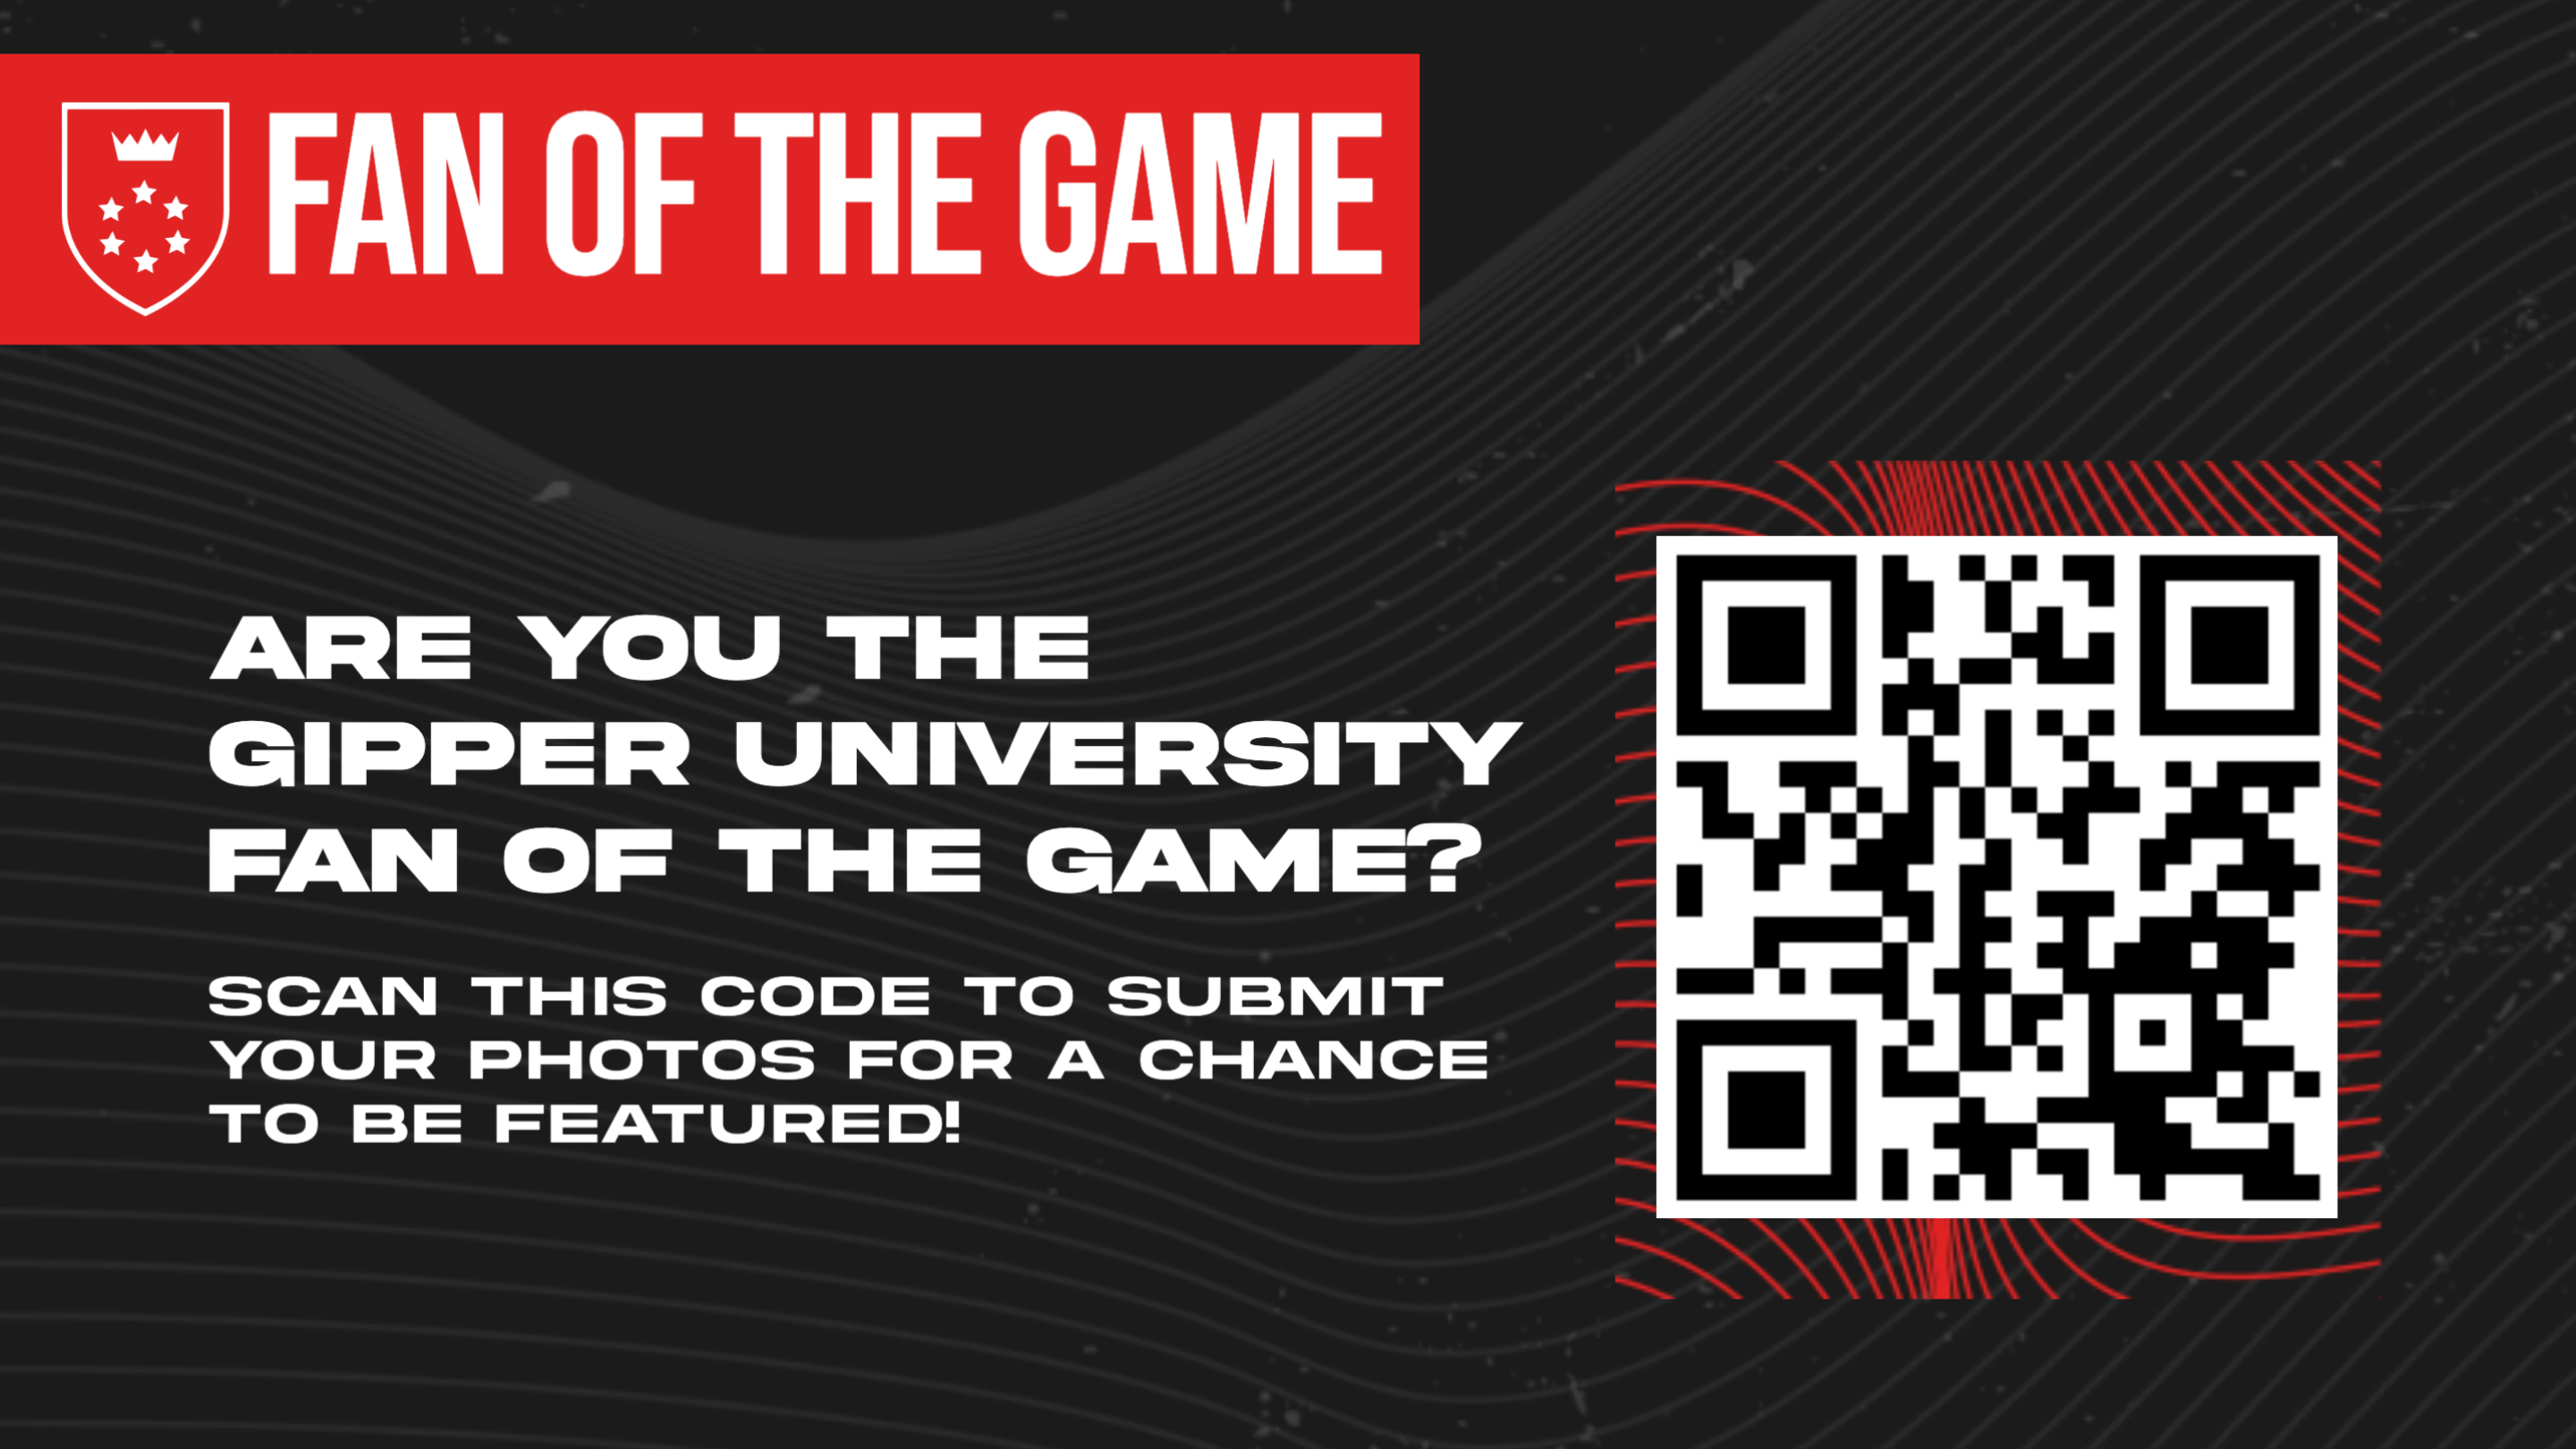 Gipper's Fan of the Game graphic template featuring a black and red background with "Fan of the Game" text and a QR code